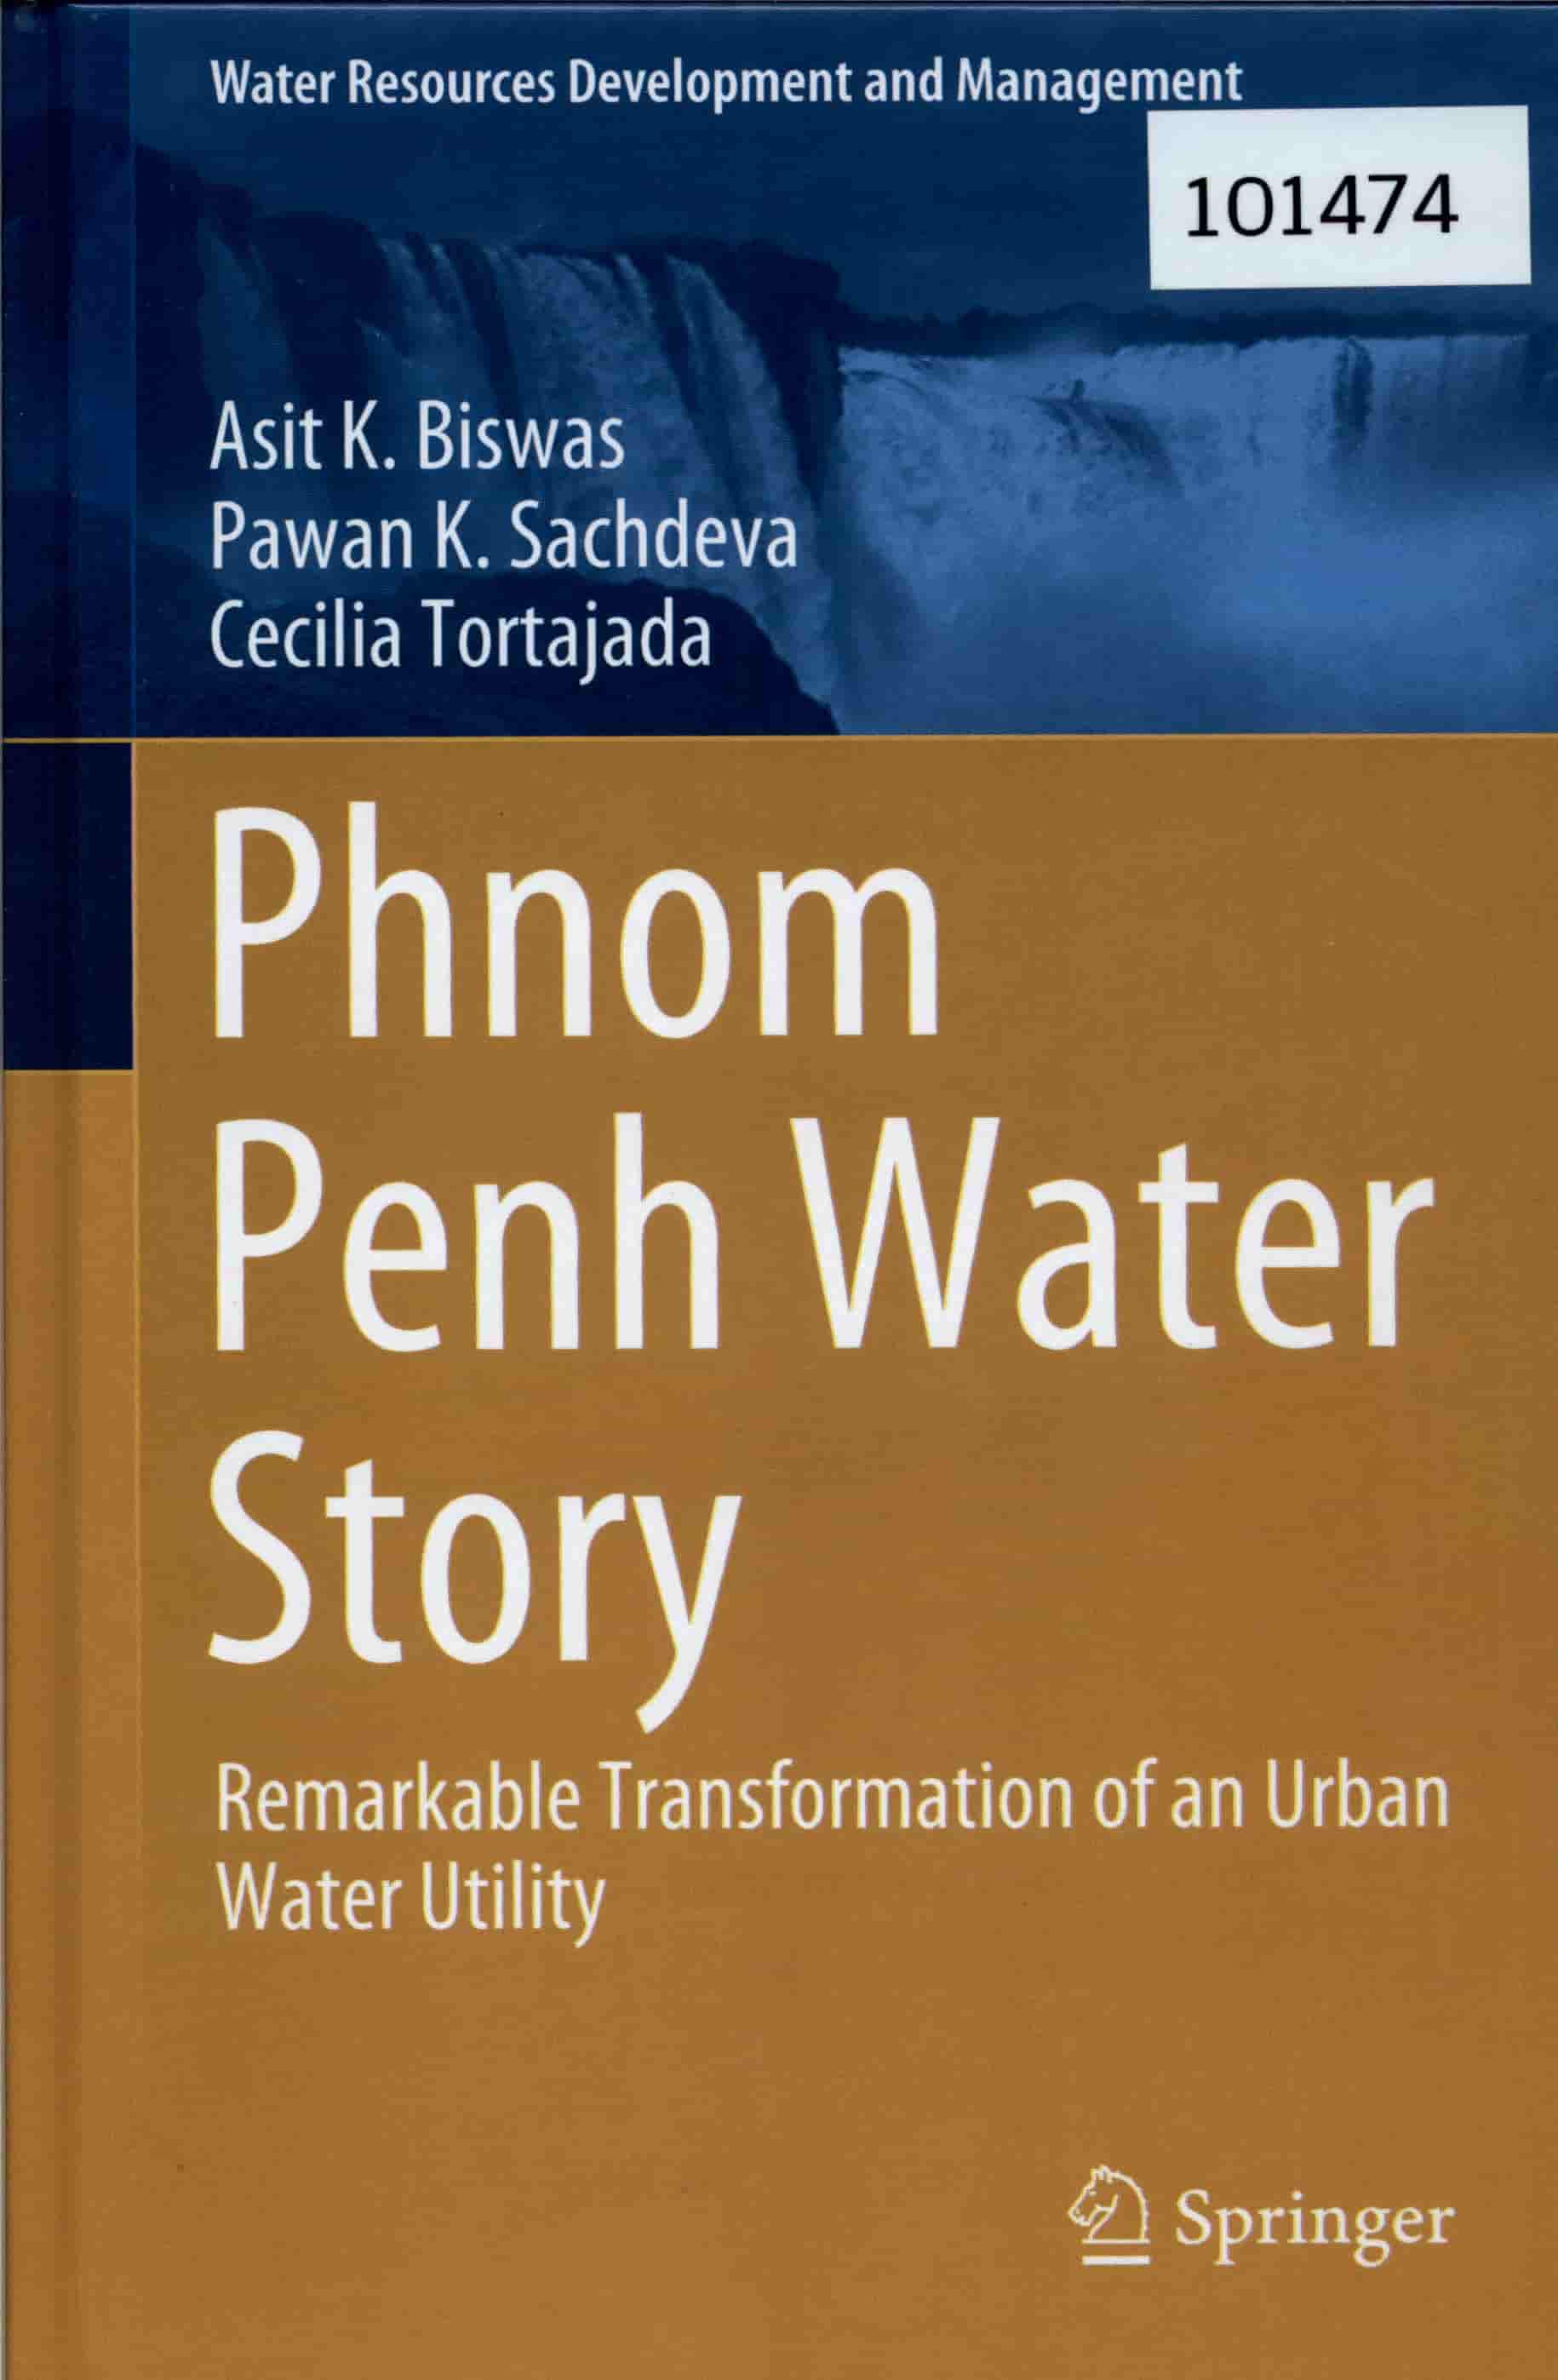 Phnom Penh water story: remarkable transformation of an urban water utility